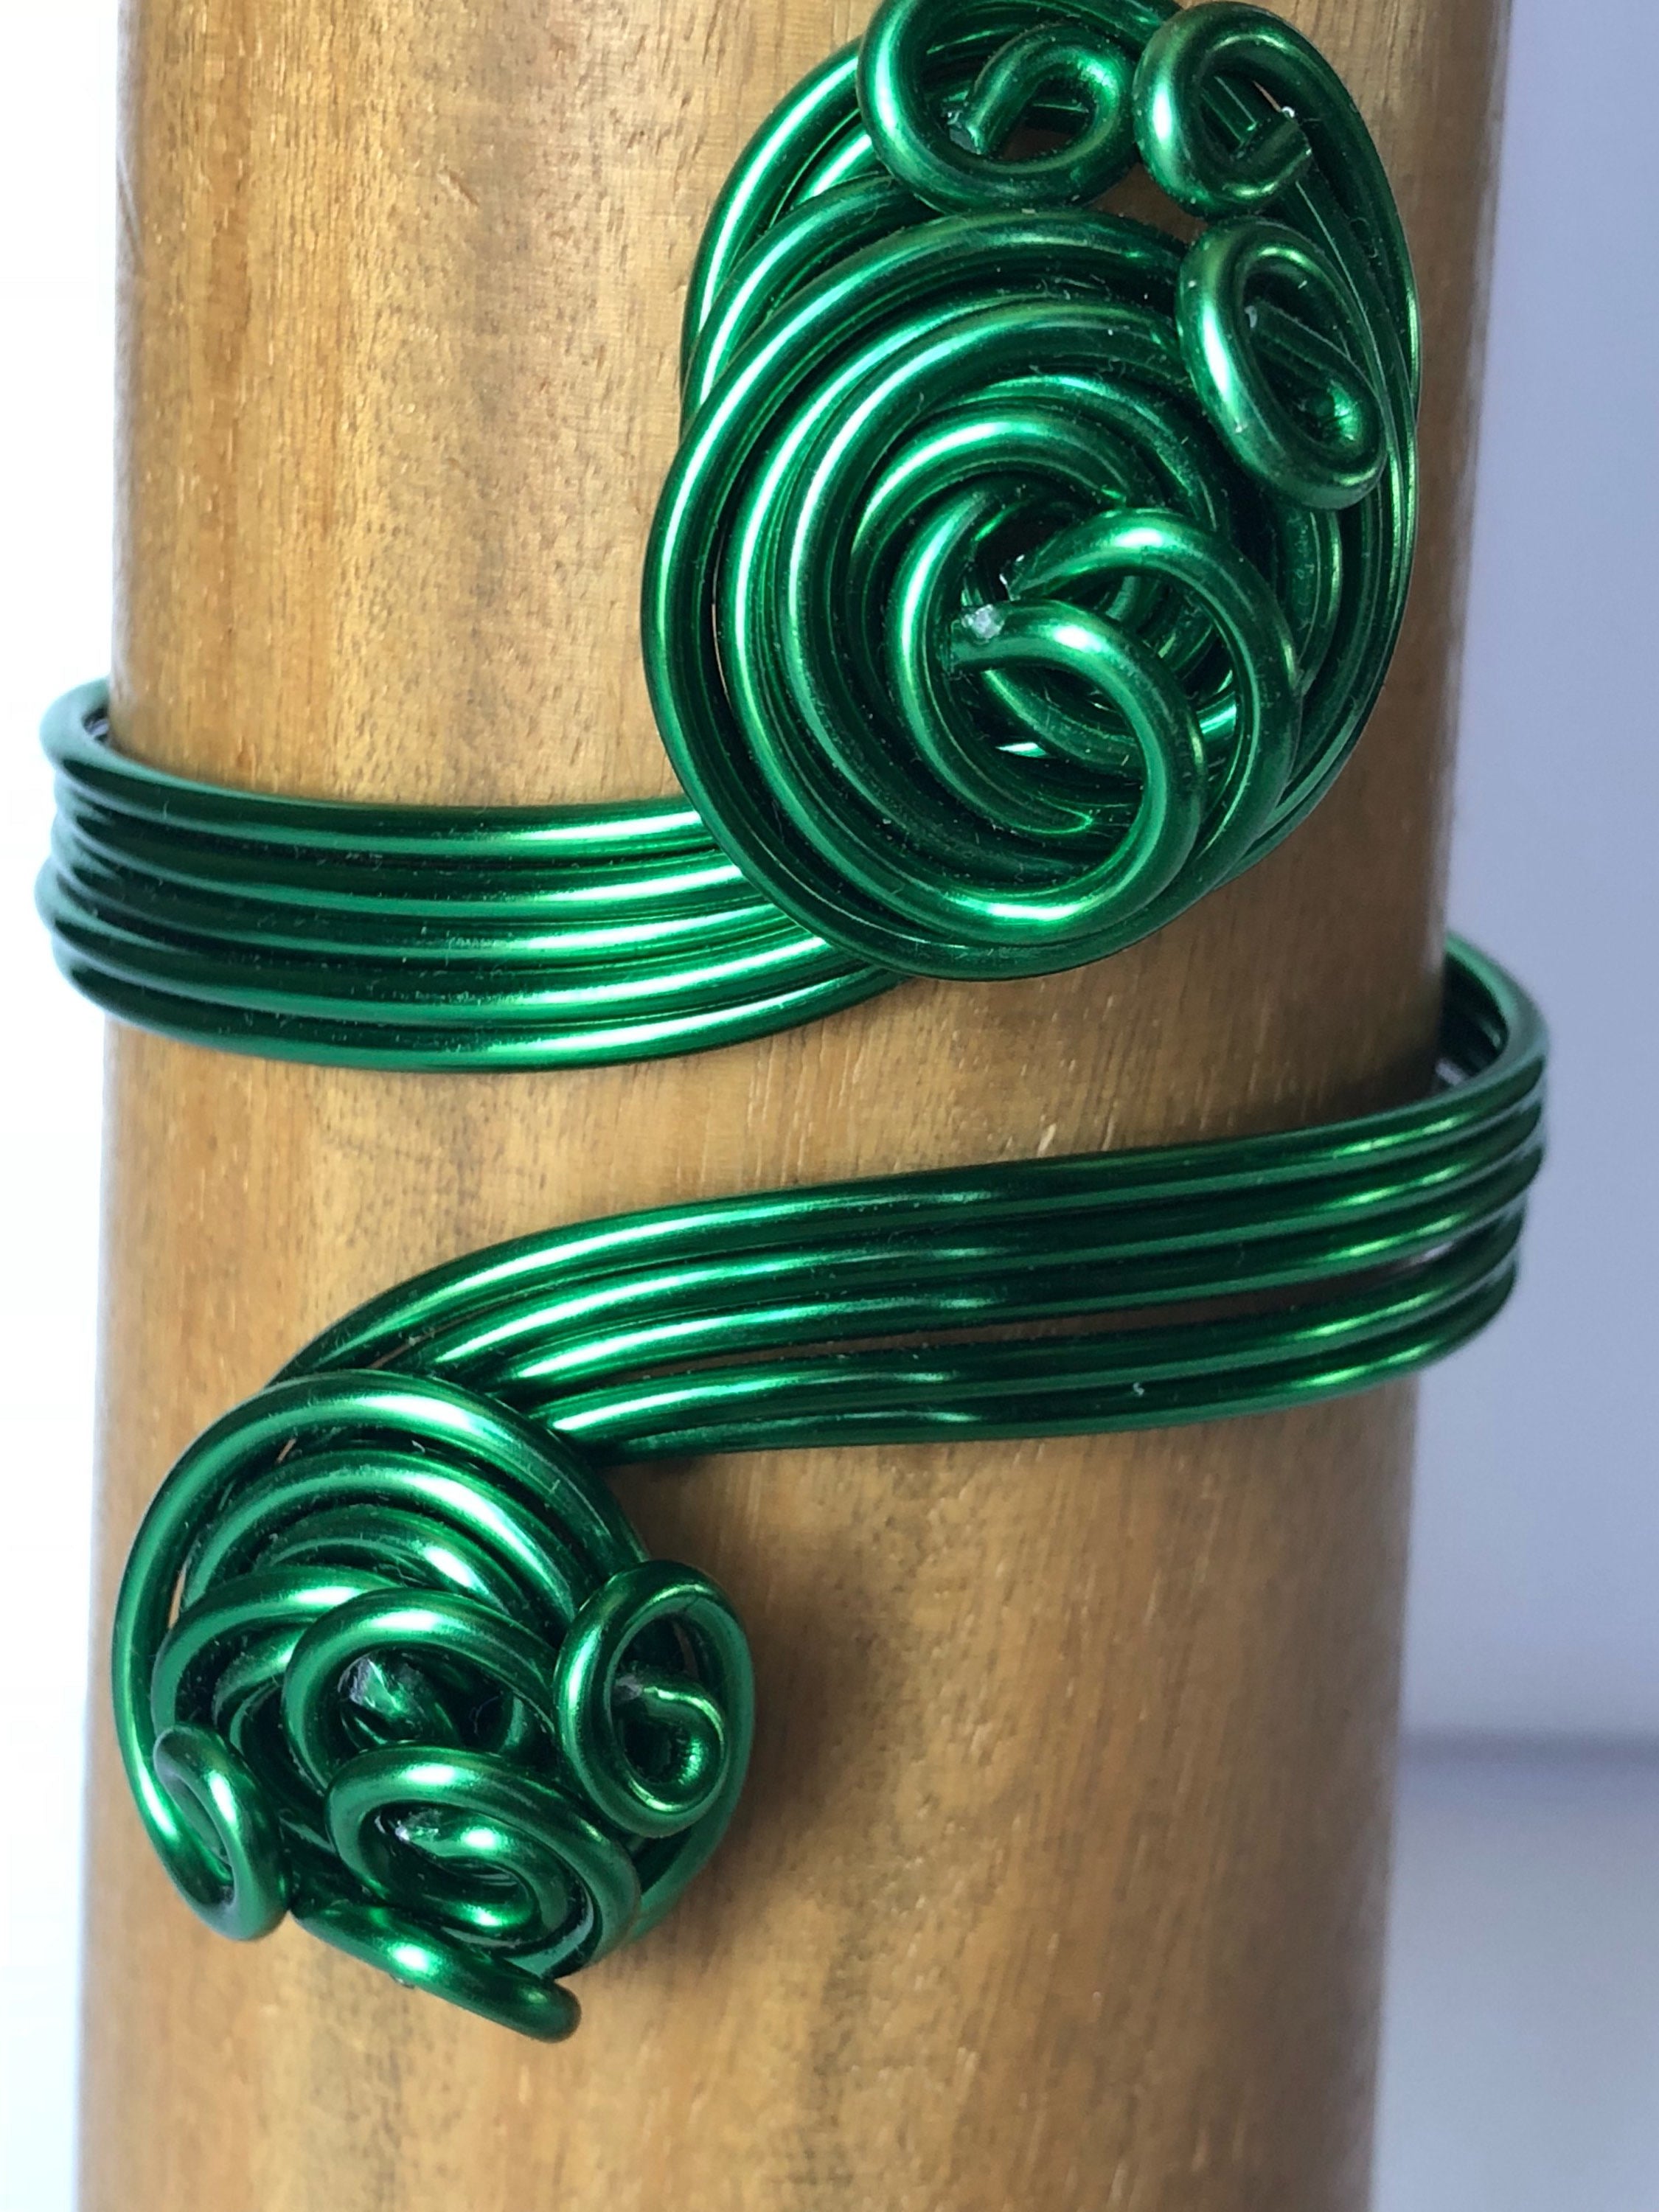 Green Malachite, Zircon & Chrysoprase Gemstone Cuff Bracelet by Ziio.  Accented with Black Spinel, White Water Pearls & Murano Glass Beads. Made  in Italy.